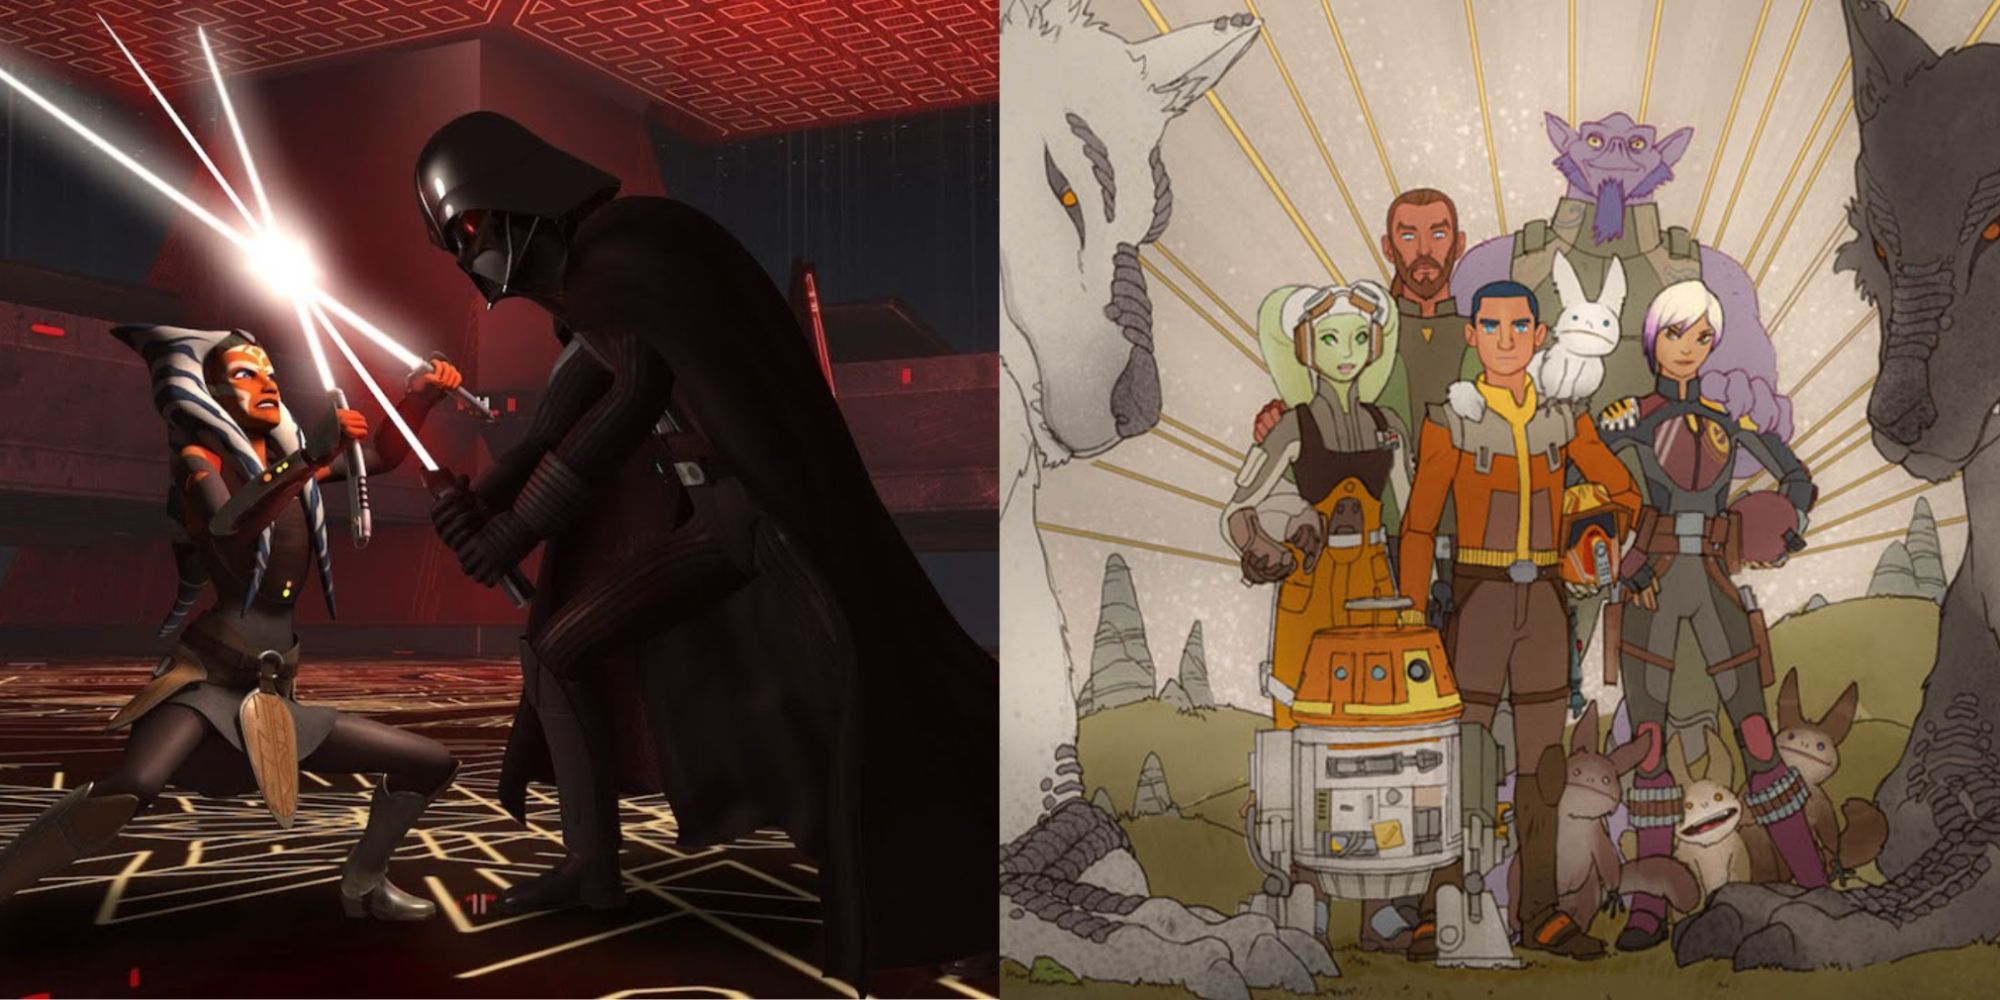 Split image of Ahsoka fighting Darth Vader and the Ghost crew painting in Star Wars Rebels